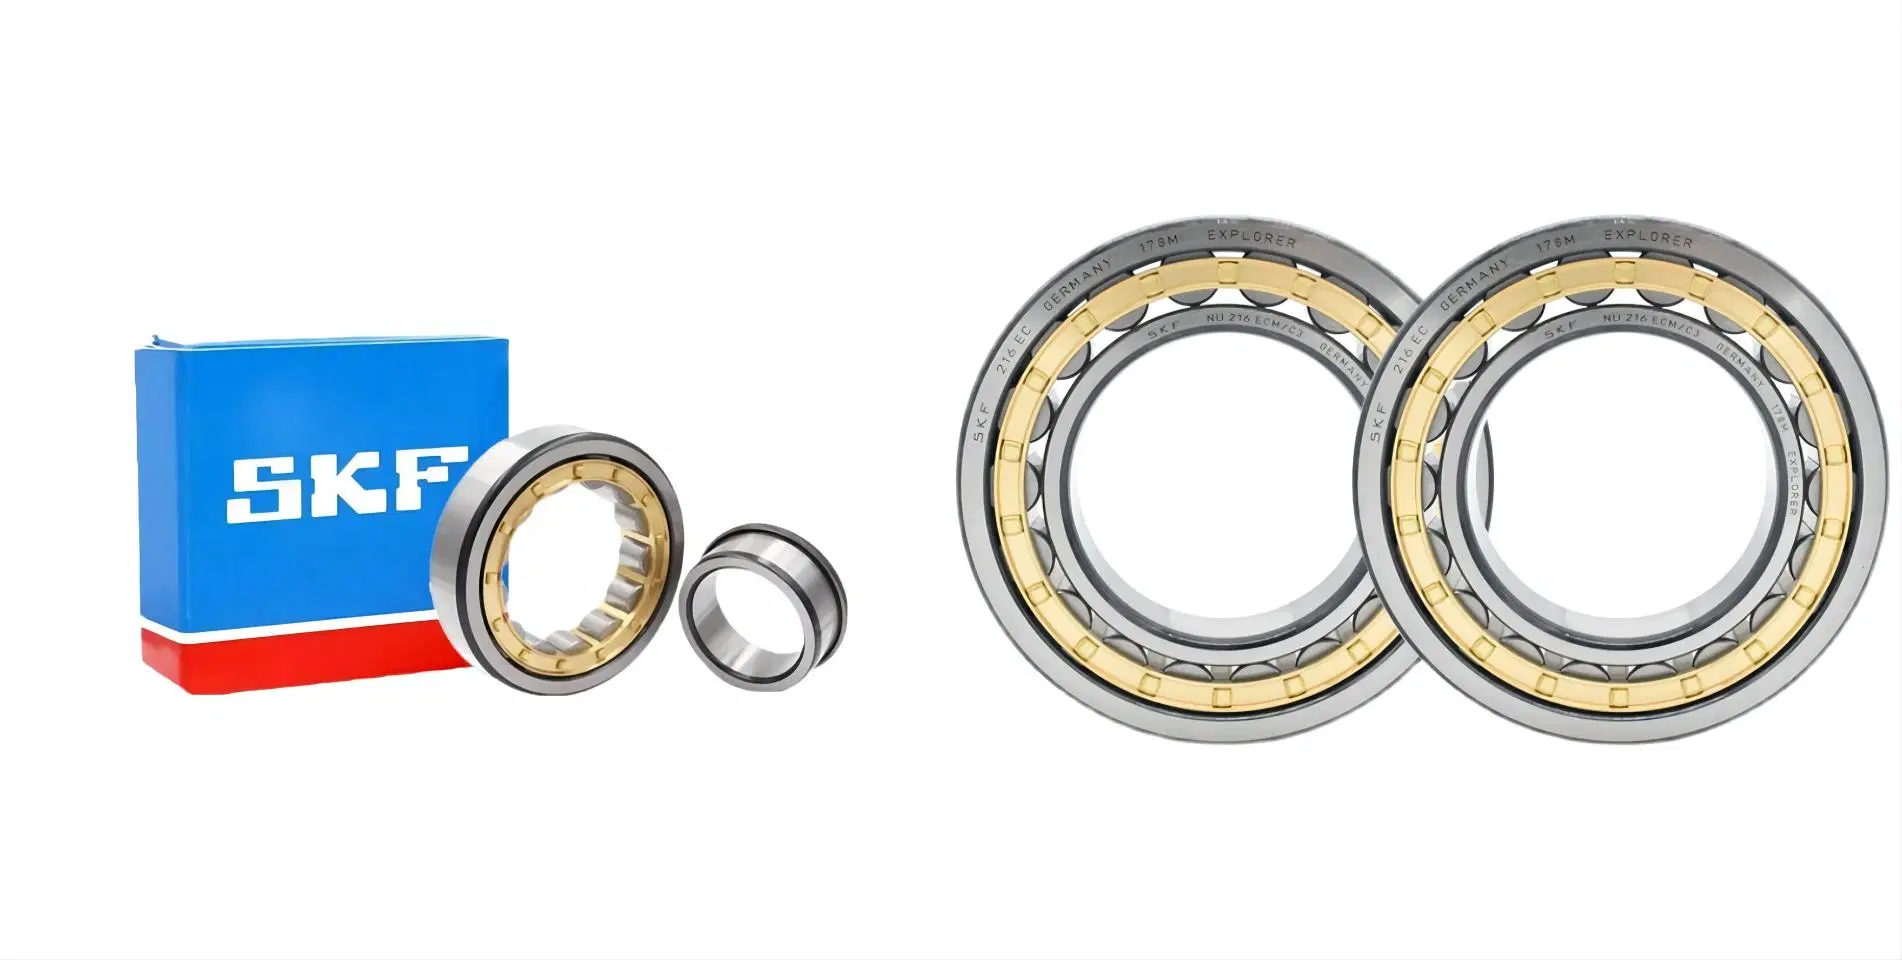 Skfnj205ecp/ Cylindrical Rolling Bearing/Rolling Bearing/ Roller Bearing/Ball Bearing